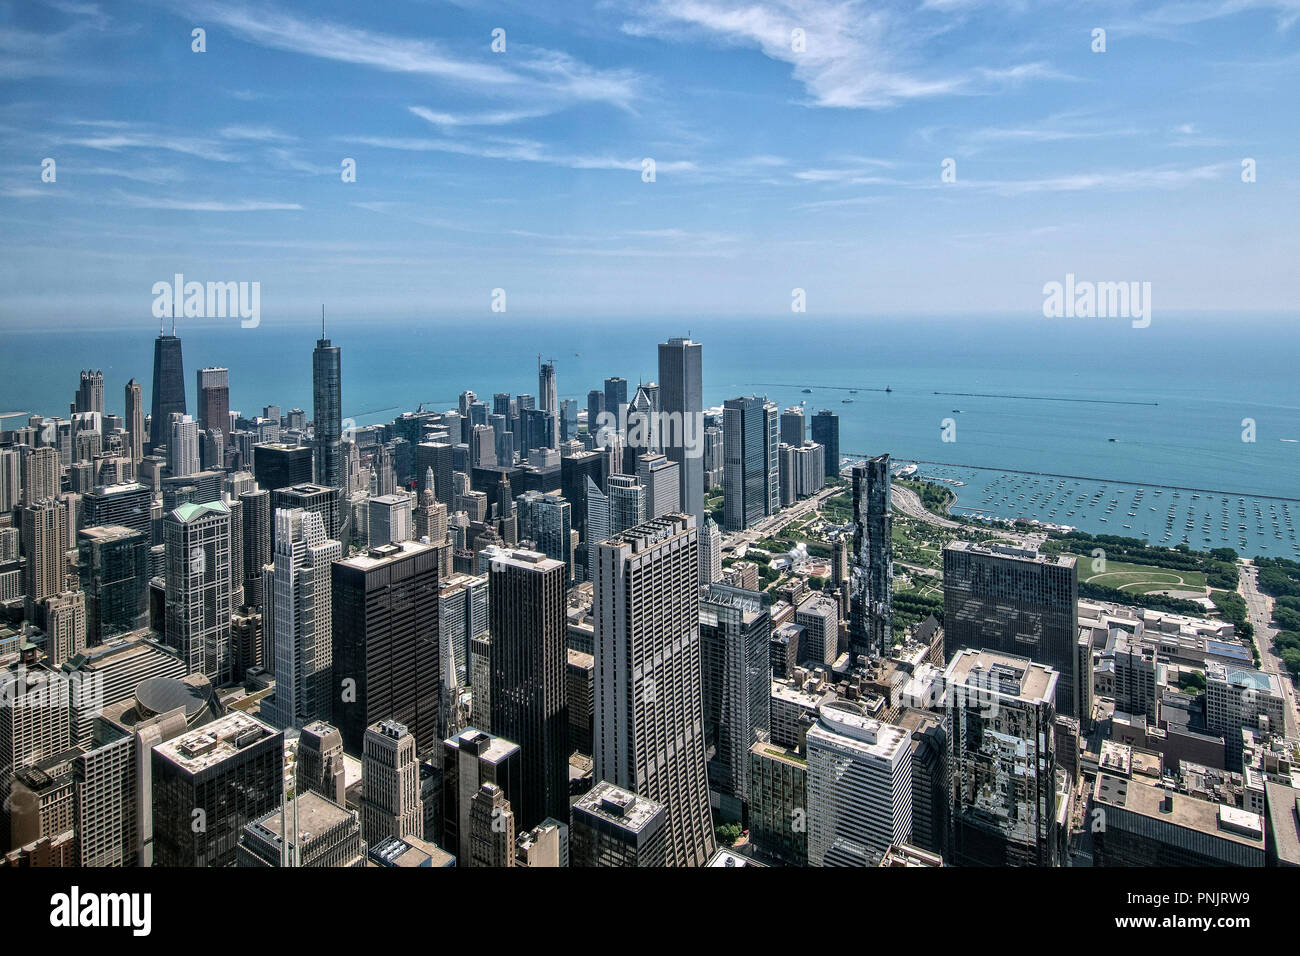 View from Willis Tower Skydeck of downtown Chicago skyscrapers, Millennium Park and Lake Michigan, Chicago, IL. Stock Photo